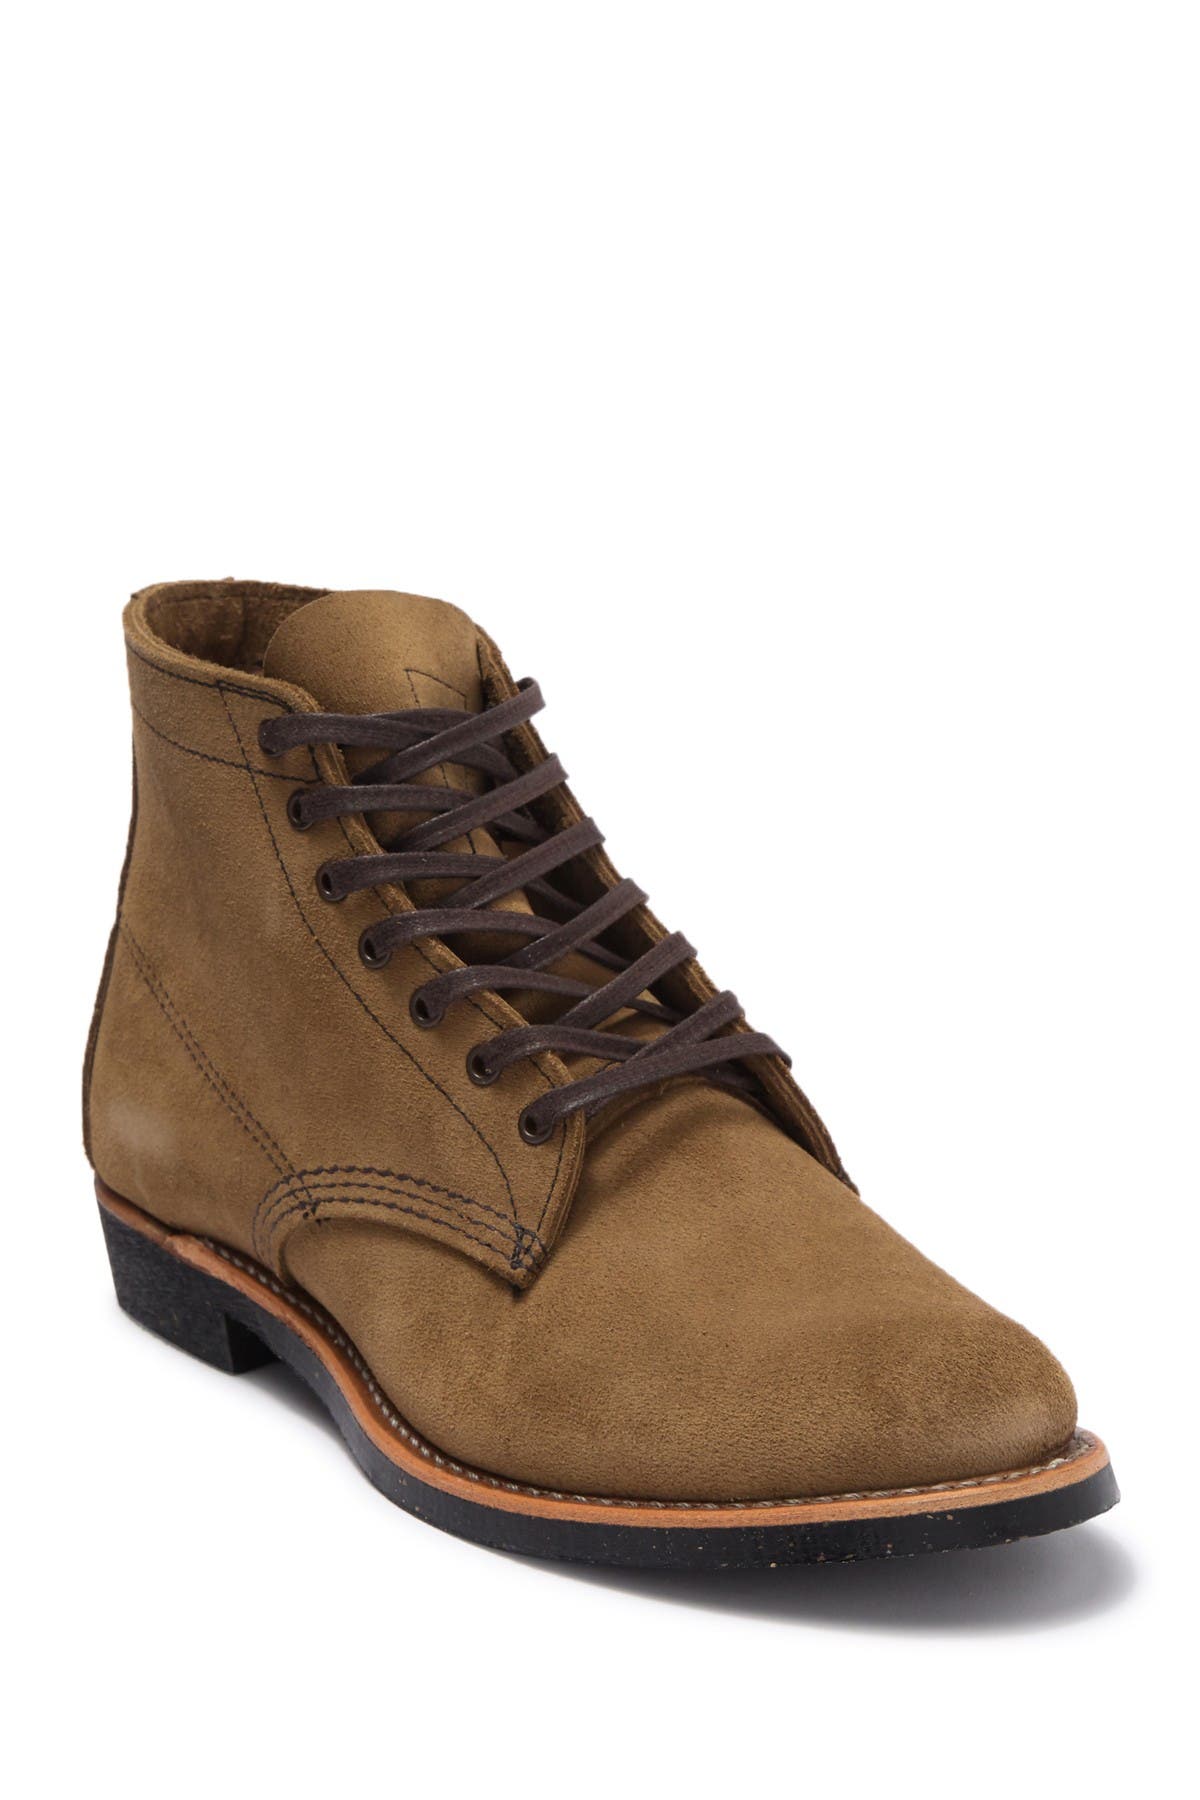 red wing merchant suede